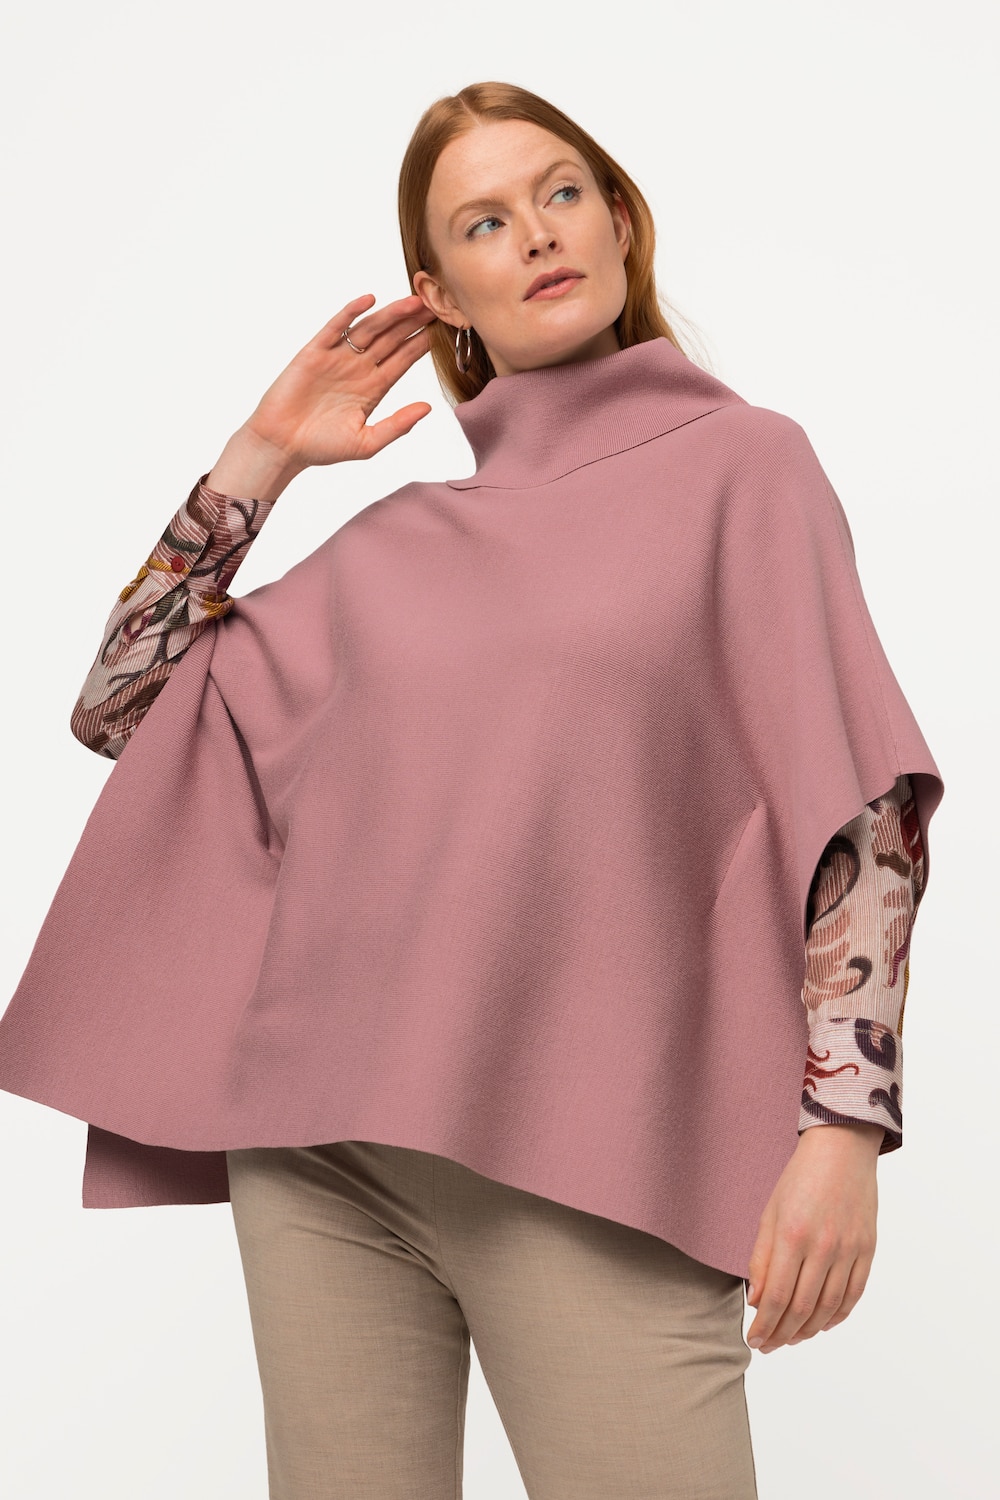 grandes tailles pull oversize style poncho à col montant et sans manches, femmes, rose, taille: 44-50, viscose/polyester, ulla popken